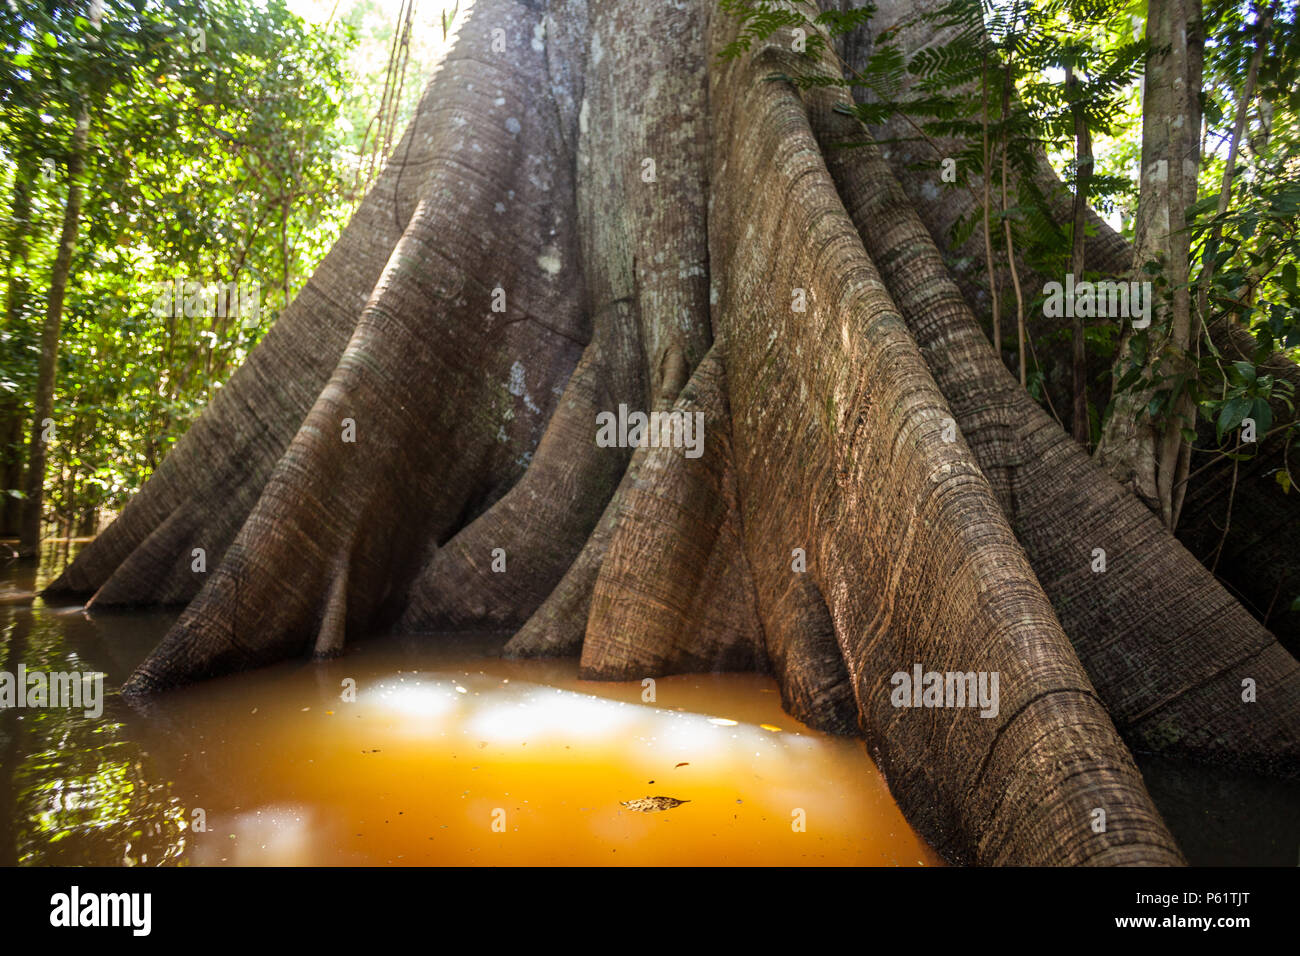 A Sumauma tree (Ceiba pentandra) with  more than 40 meters of height, flooded by the waters of  Negro river in the Amazon rainforest. Stock Photo